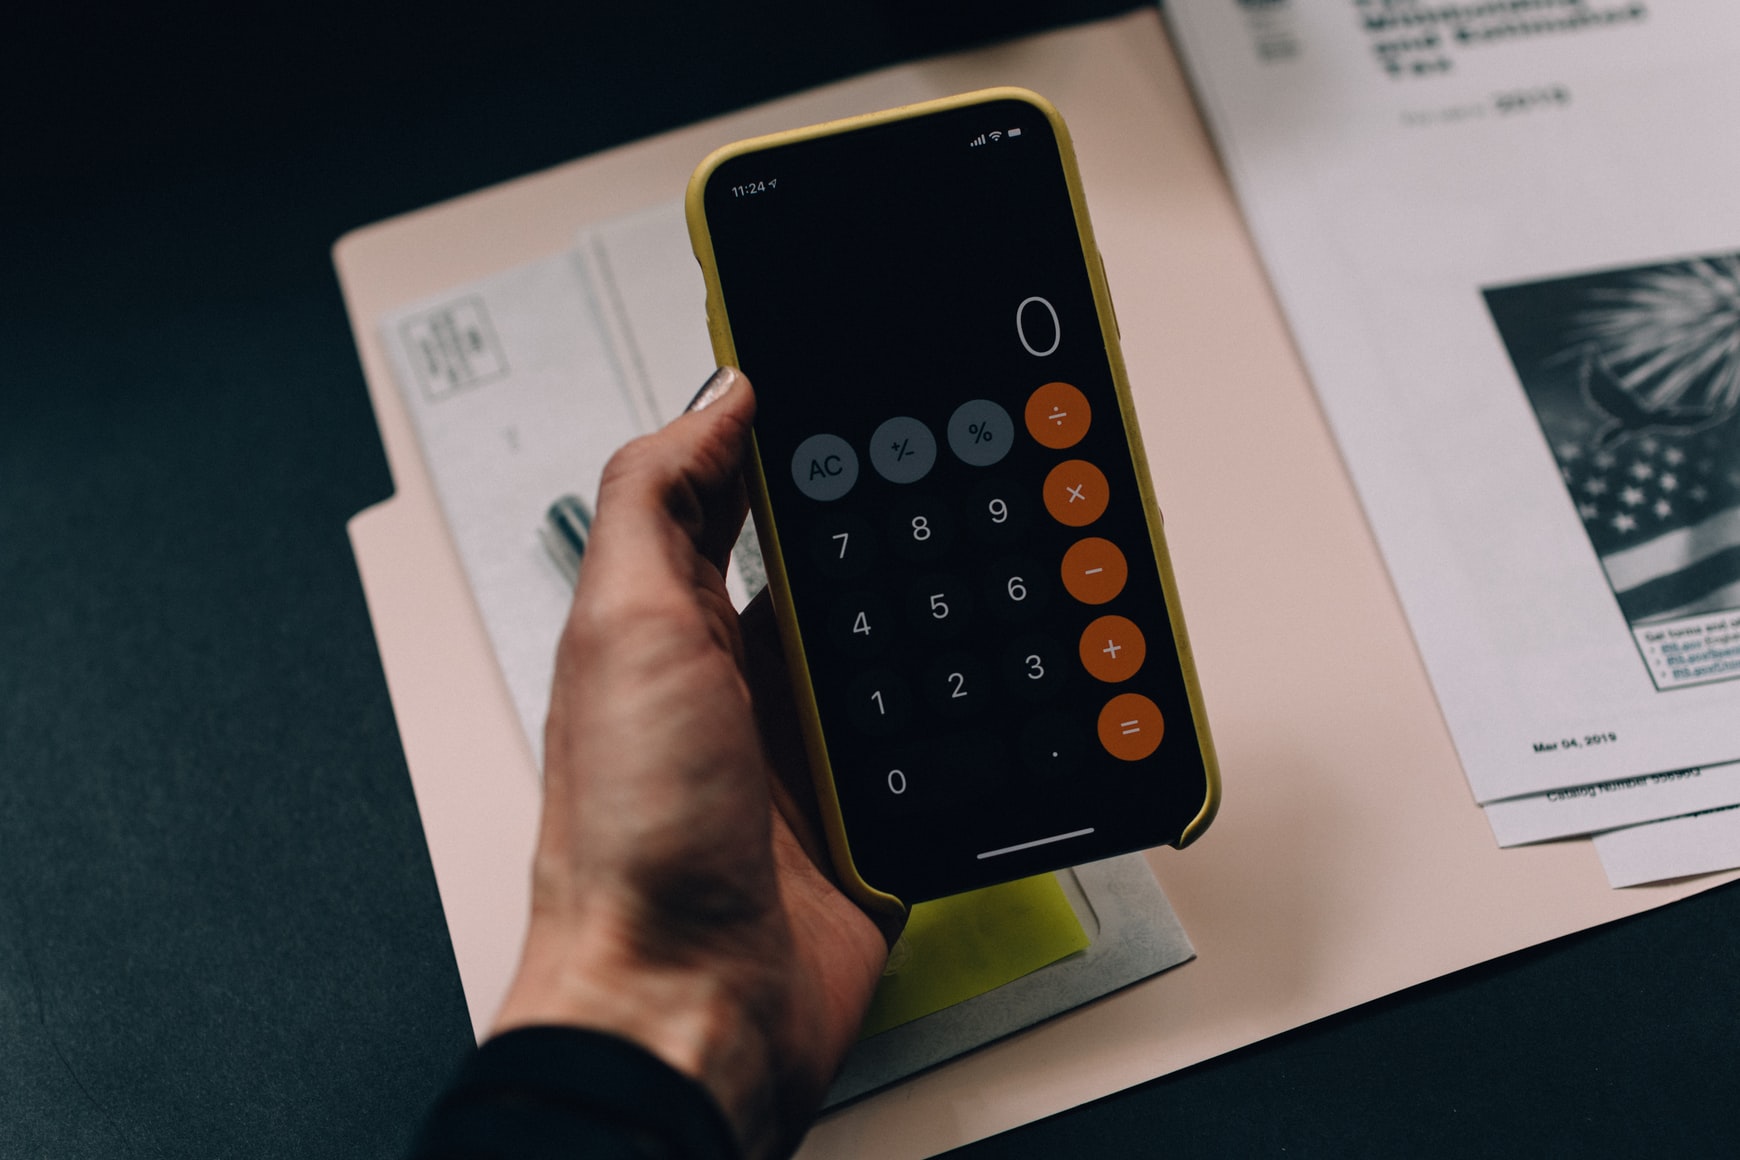 Holding a phone calculator with folder in background